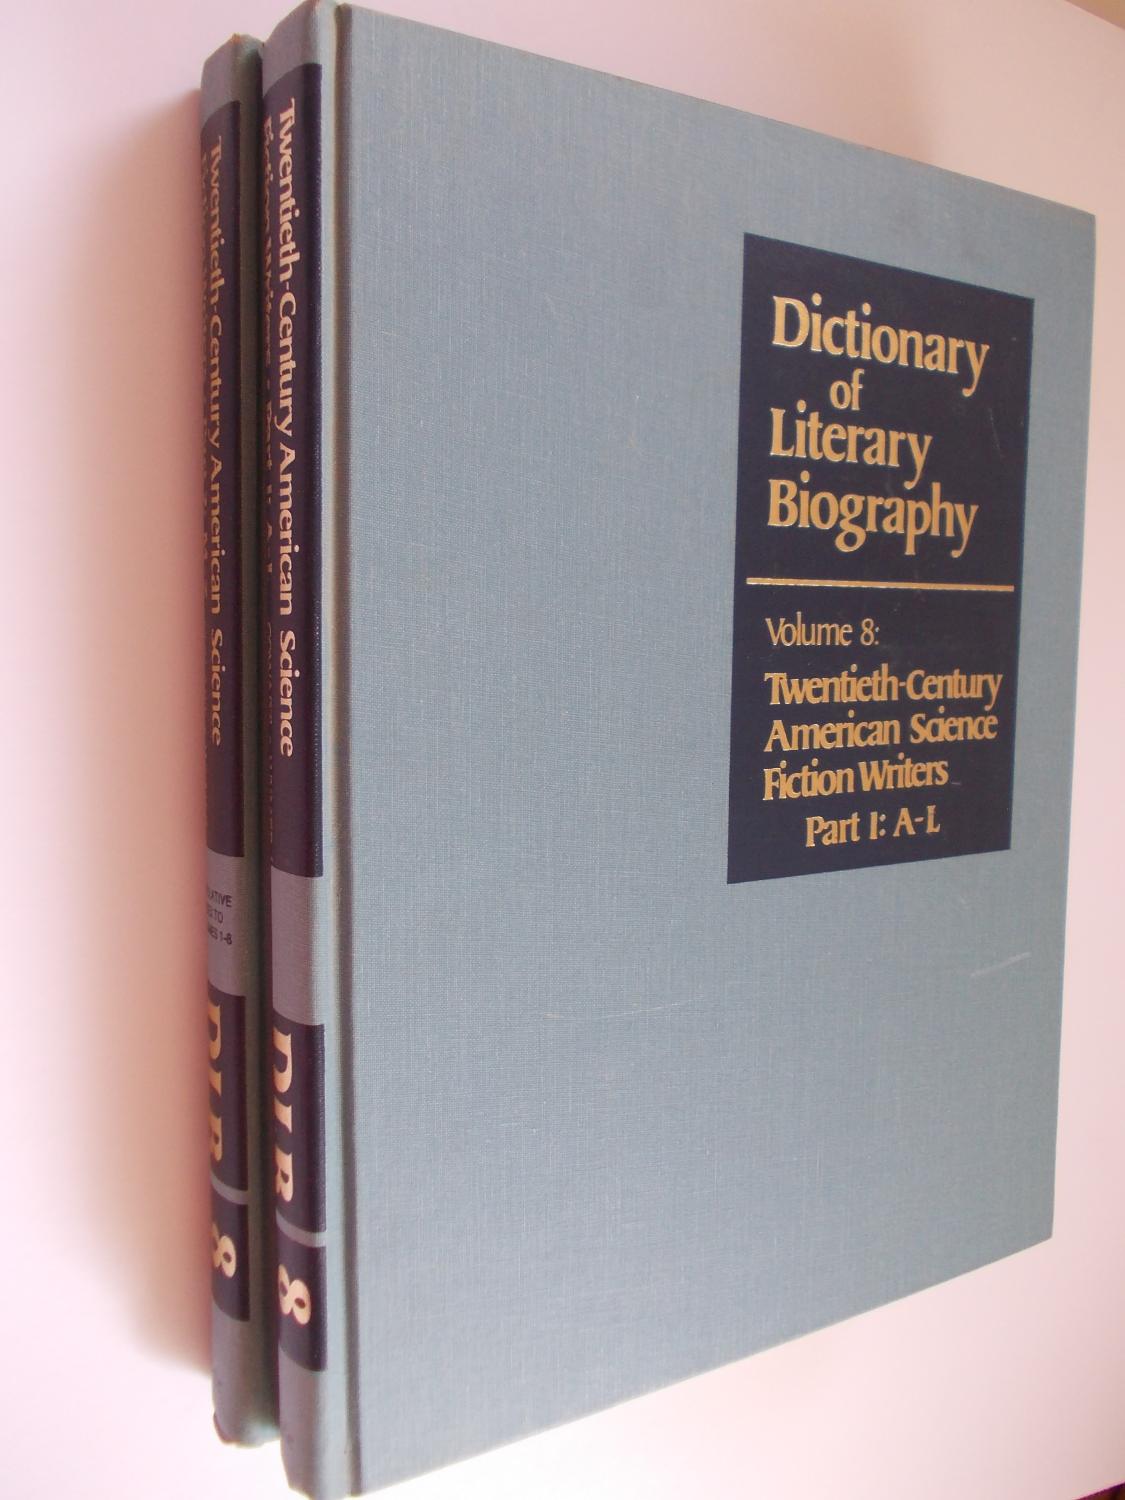 Dictionary of Literary Biography Volume 8 (Part 1:A-L)., Twentieth-Century American Science Fiction Writers Part2: A-L